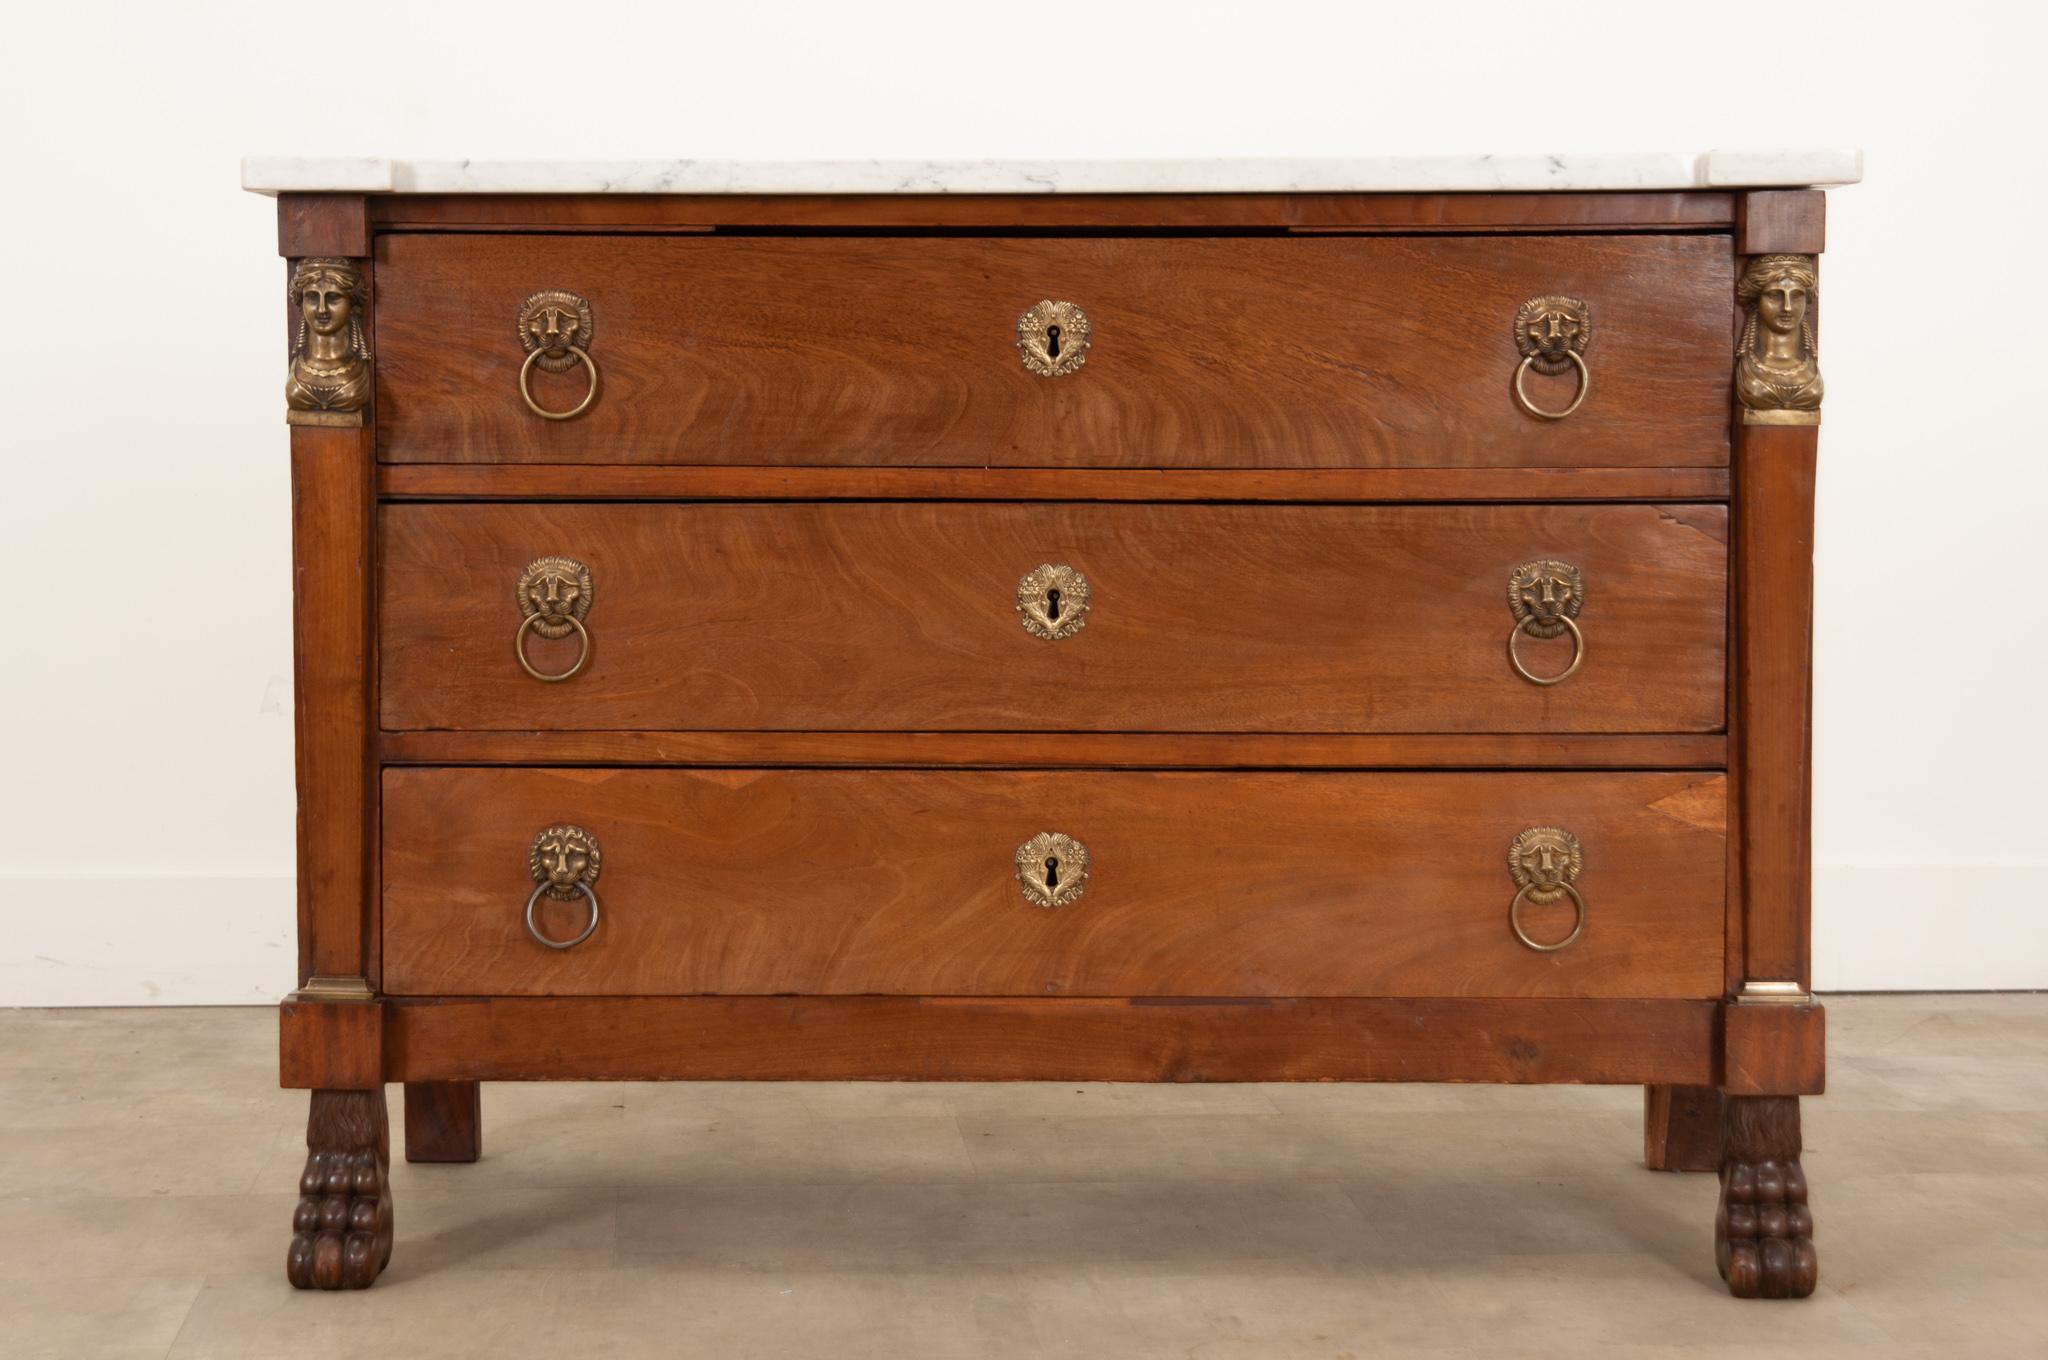 A wonderful French walnut commode hand-crafted in France circa 1830 with rather grand Empire style elements. Topped with a removable piece of white marble with lovely gray veining and shaped front corners. Three long drawers have matching cast brass